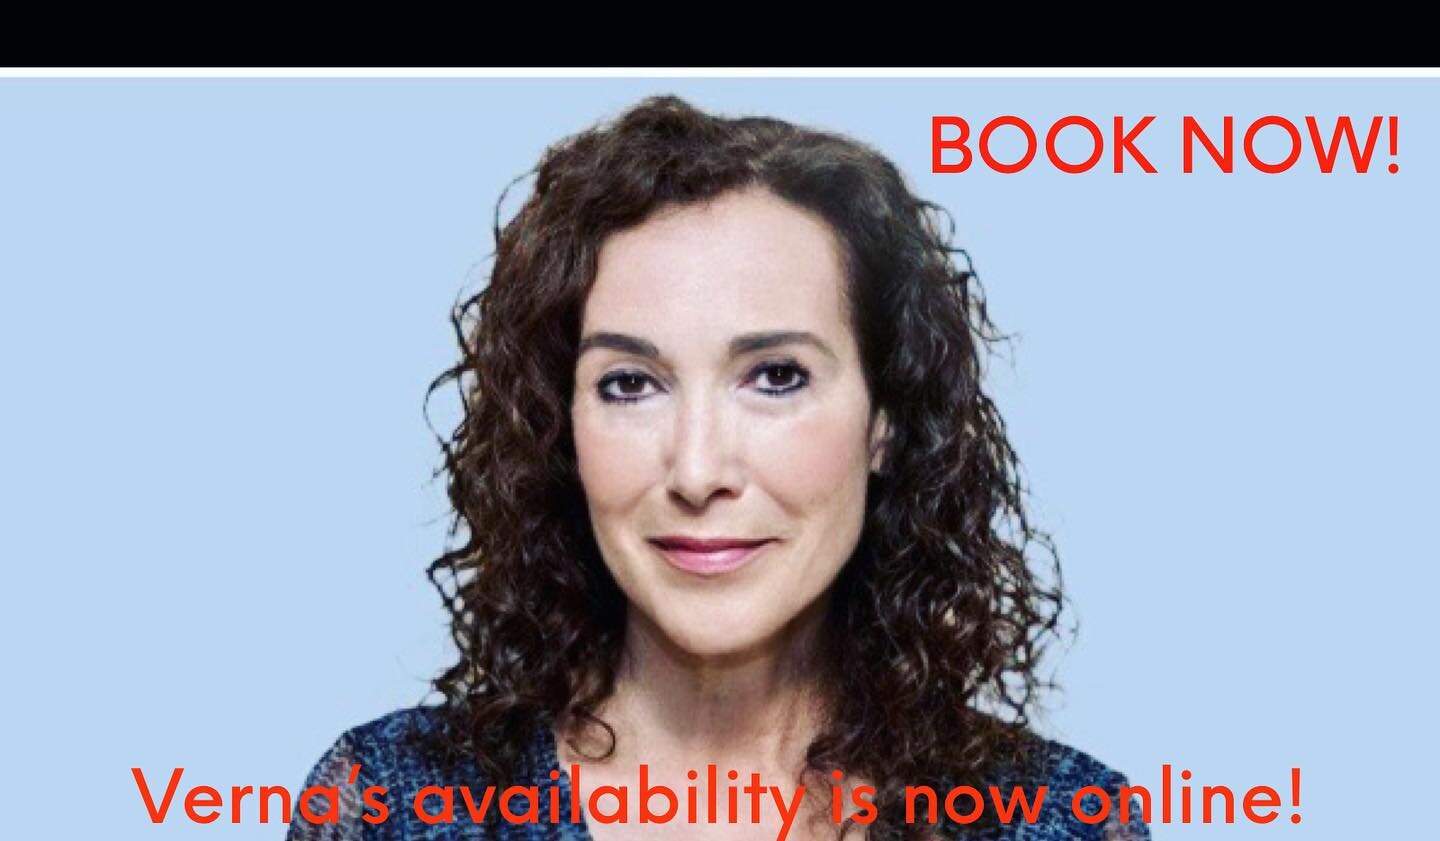 Looking for a great acting teacher to help with a last min audition? Need to develop your craft or to work on a contemporary or classical monologue? Verna has now posted her availability online.